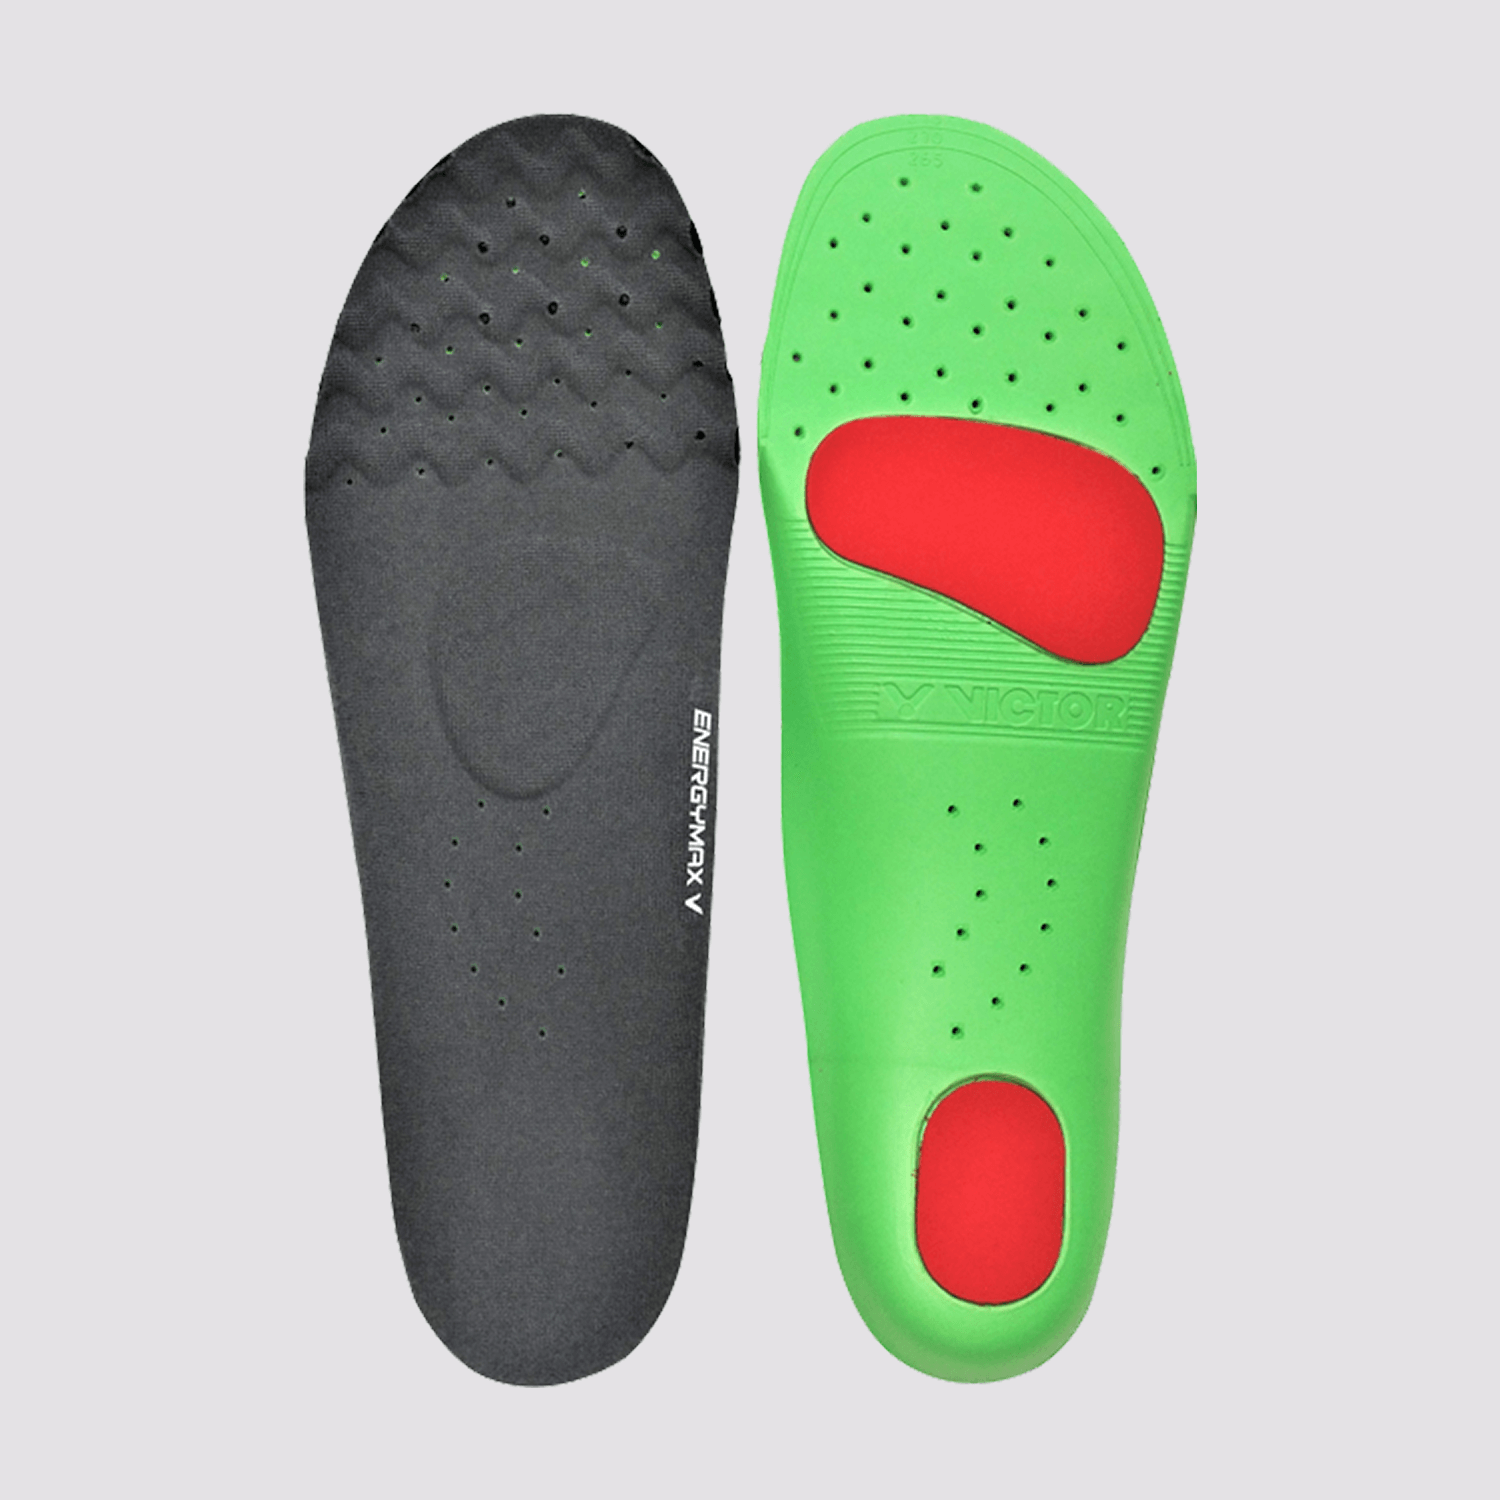 Victor VT-XD11 H X Badminton Shoe Insole (Green)